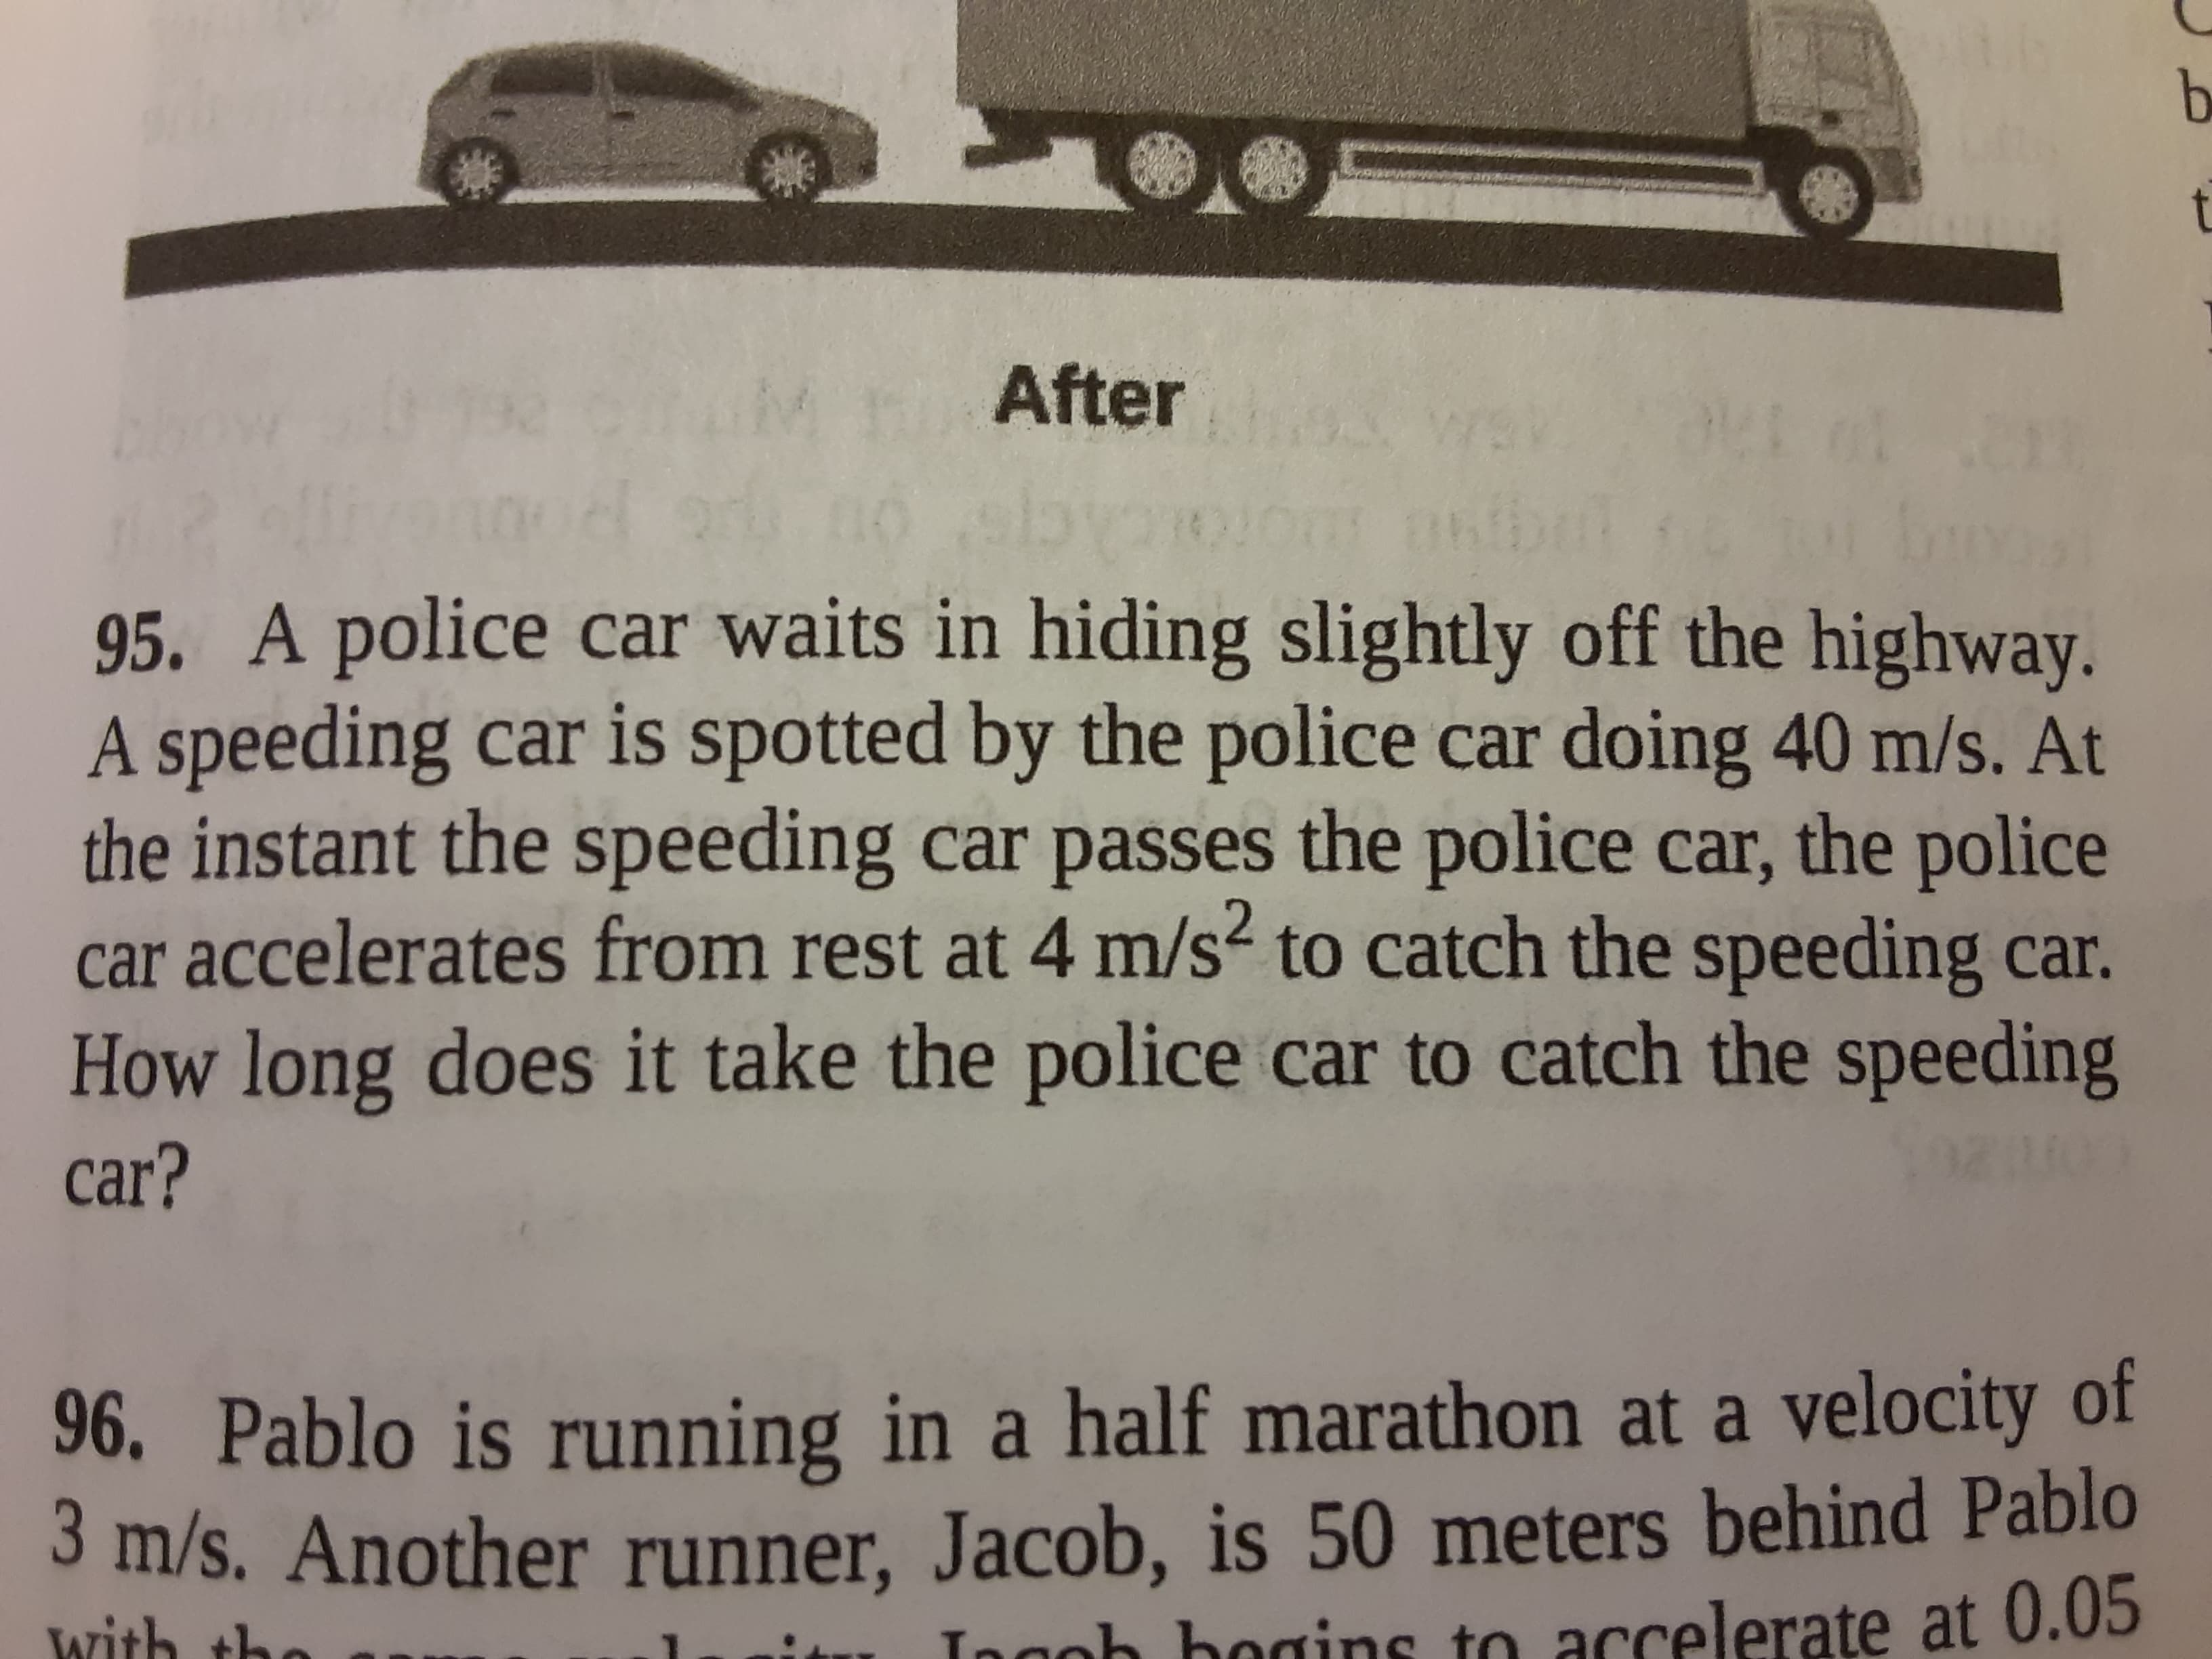 95. A police car waits in hiding slightly off the highway.
A speeding car is spotted by the police car doing 40 m/s. At
the instant the speeding car passes the police car, the police
car accelerates from rest at 4 m/s2 to catch the speeding car.
How long does it take the police car to catch the speeding
car?
